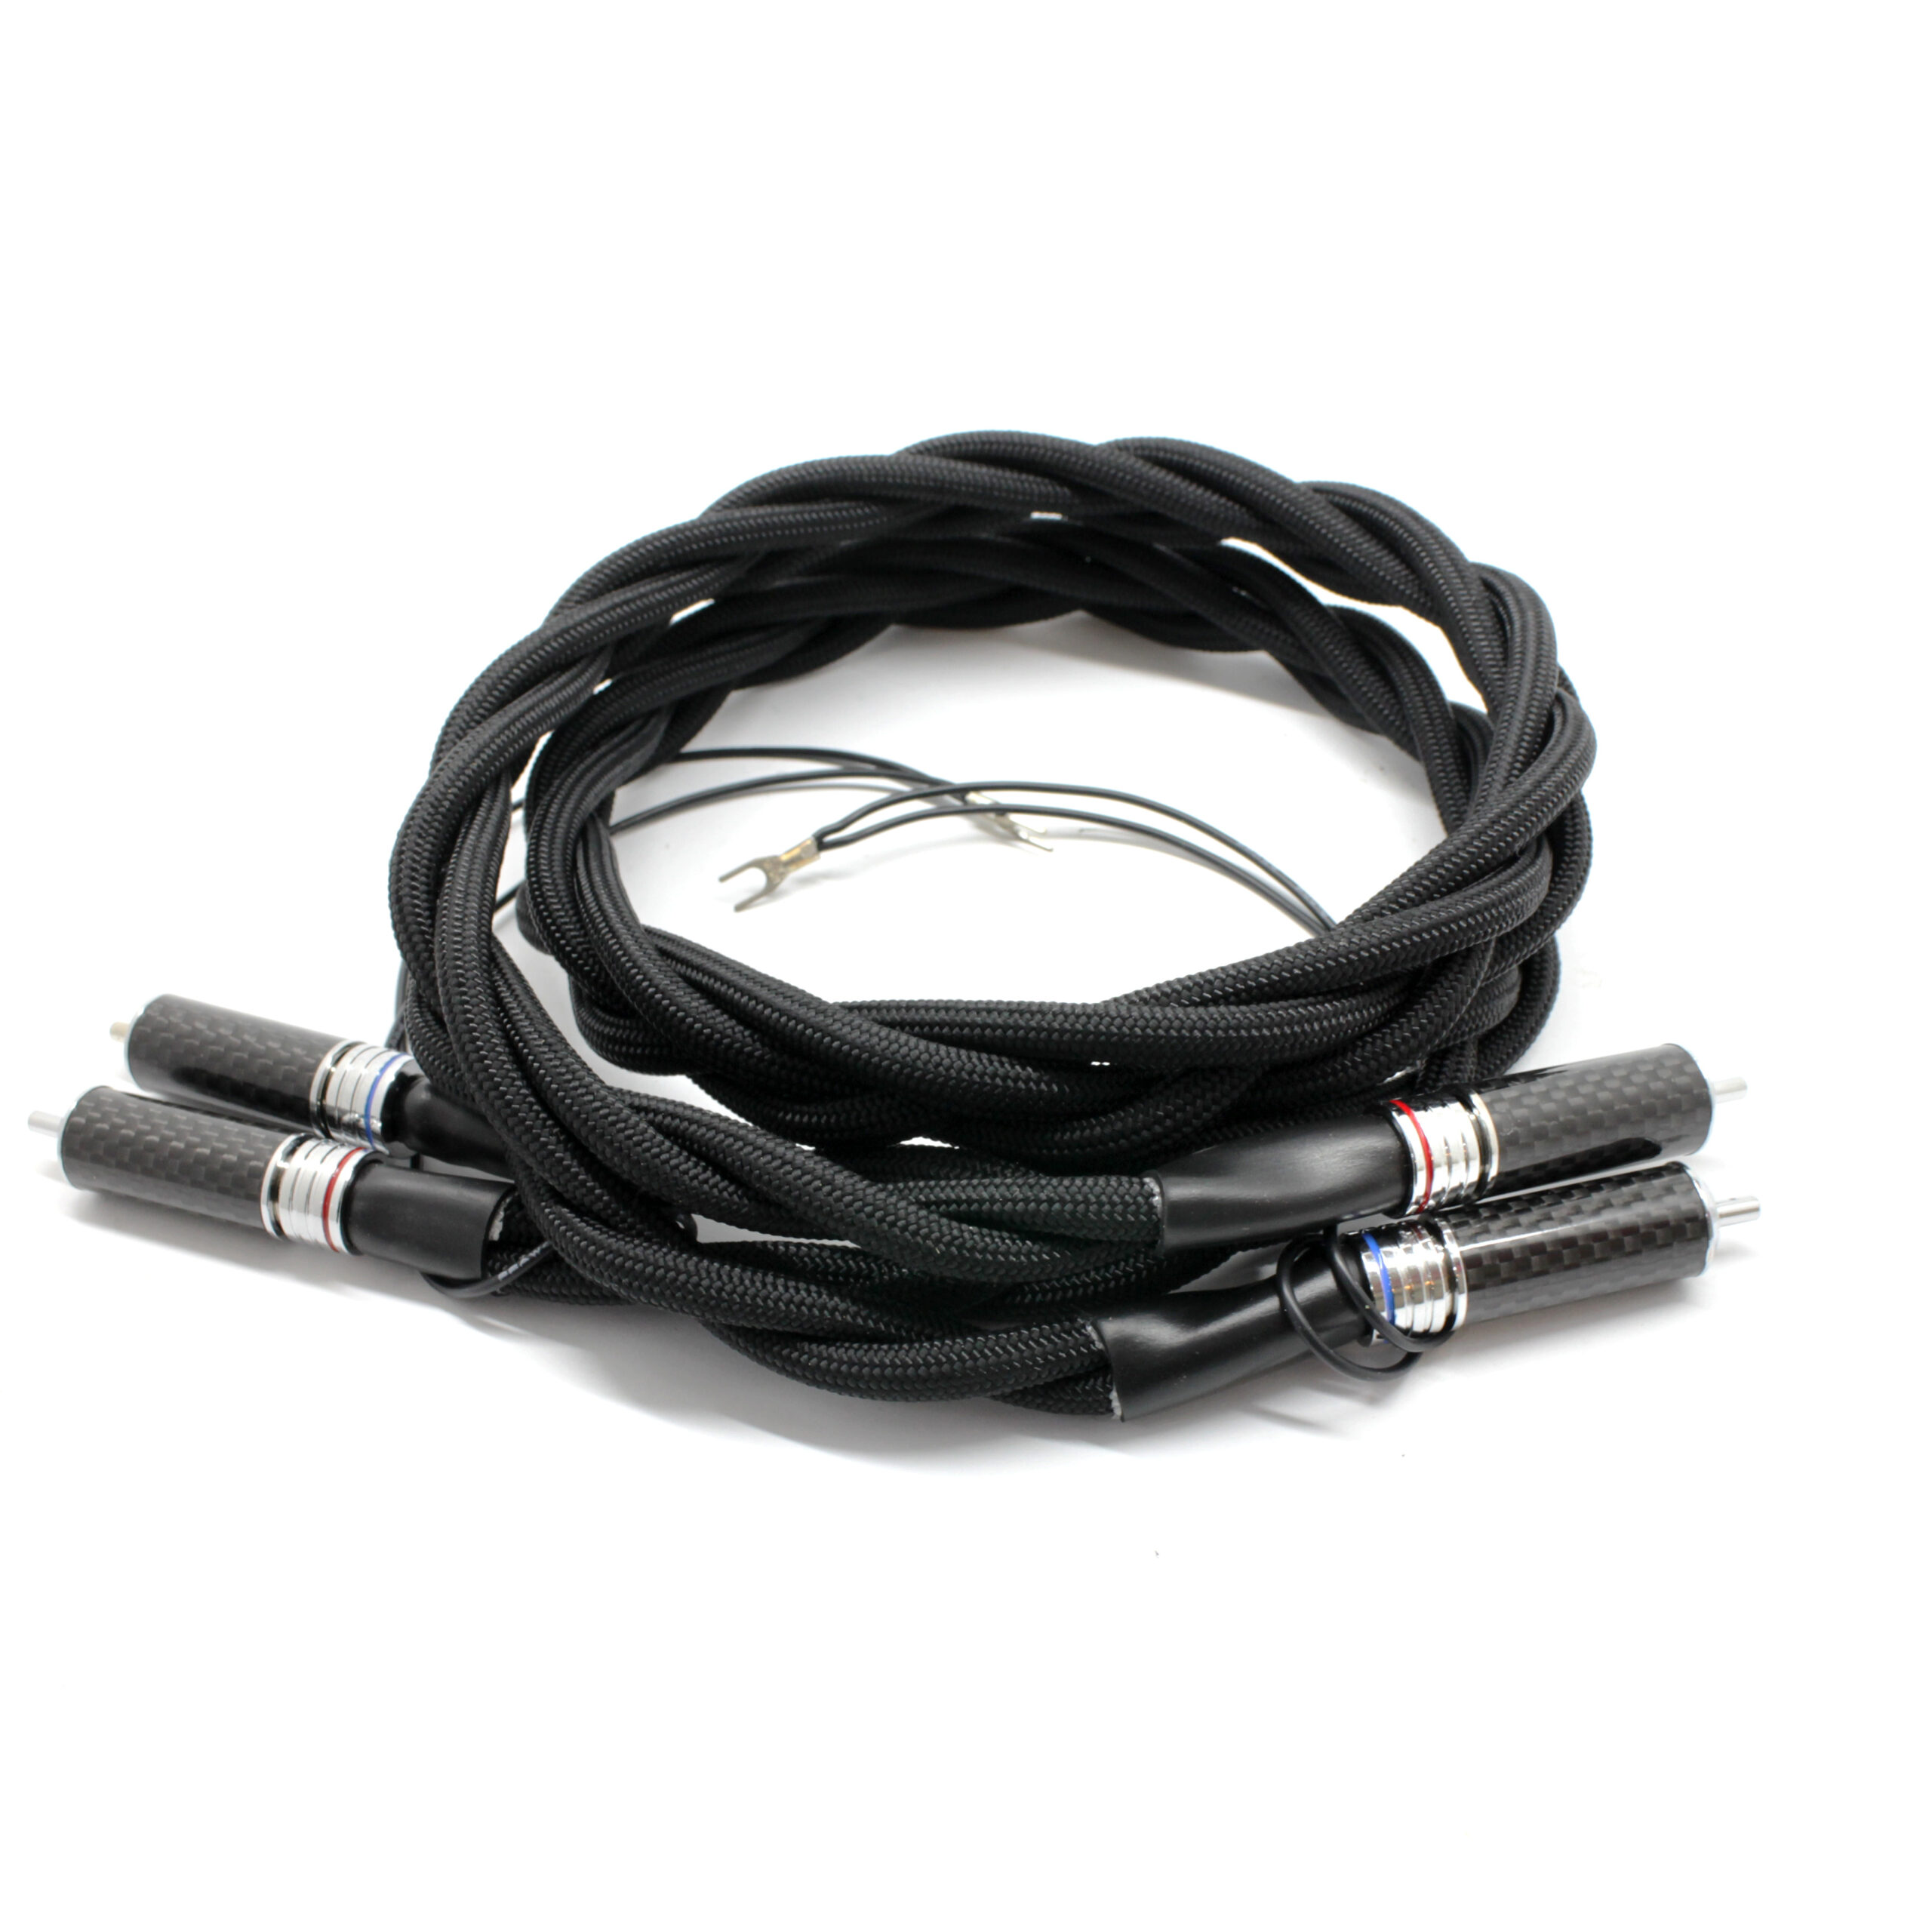 High end Turntable cable, low capacitance silk covered litz copper - Custom  Cans Shop